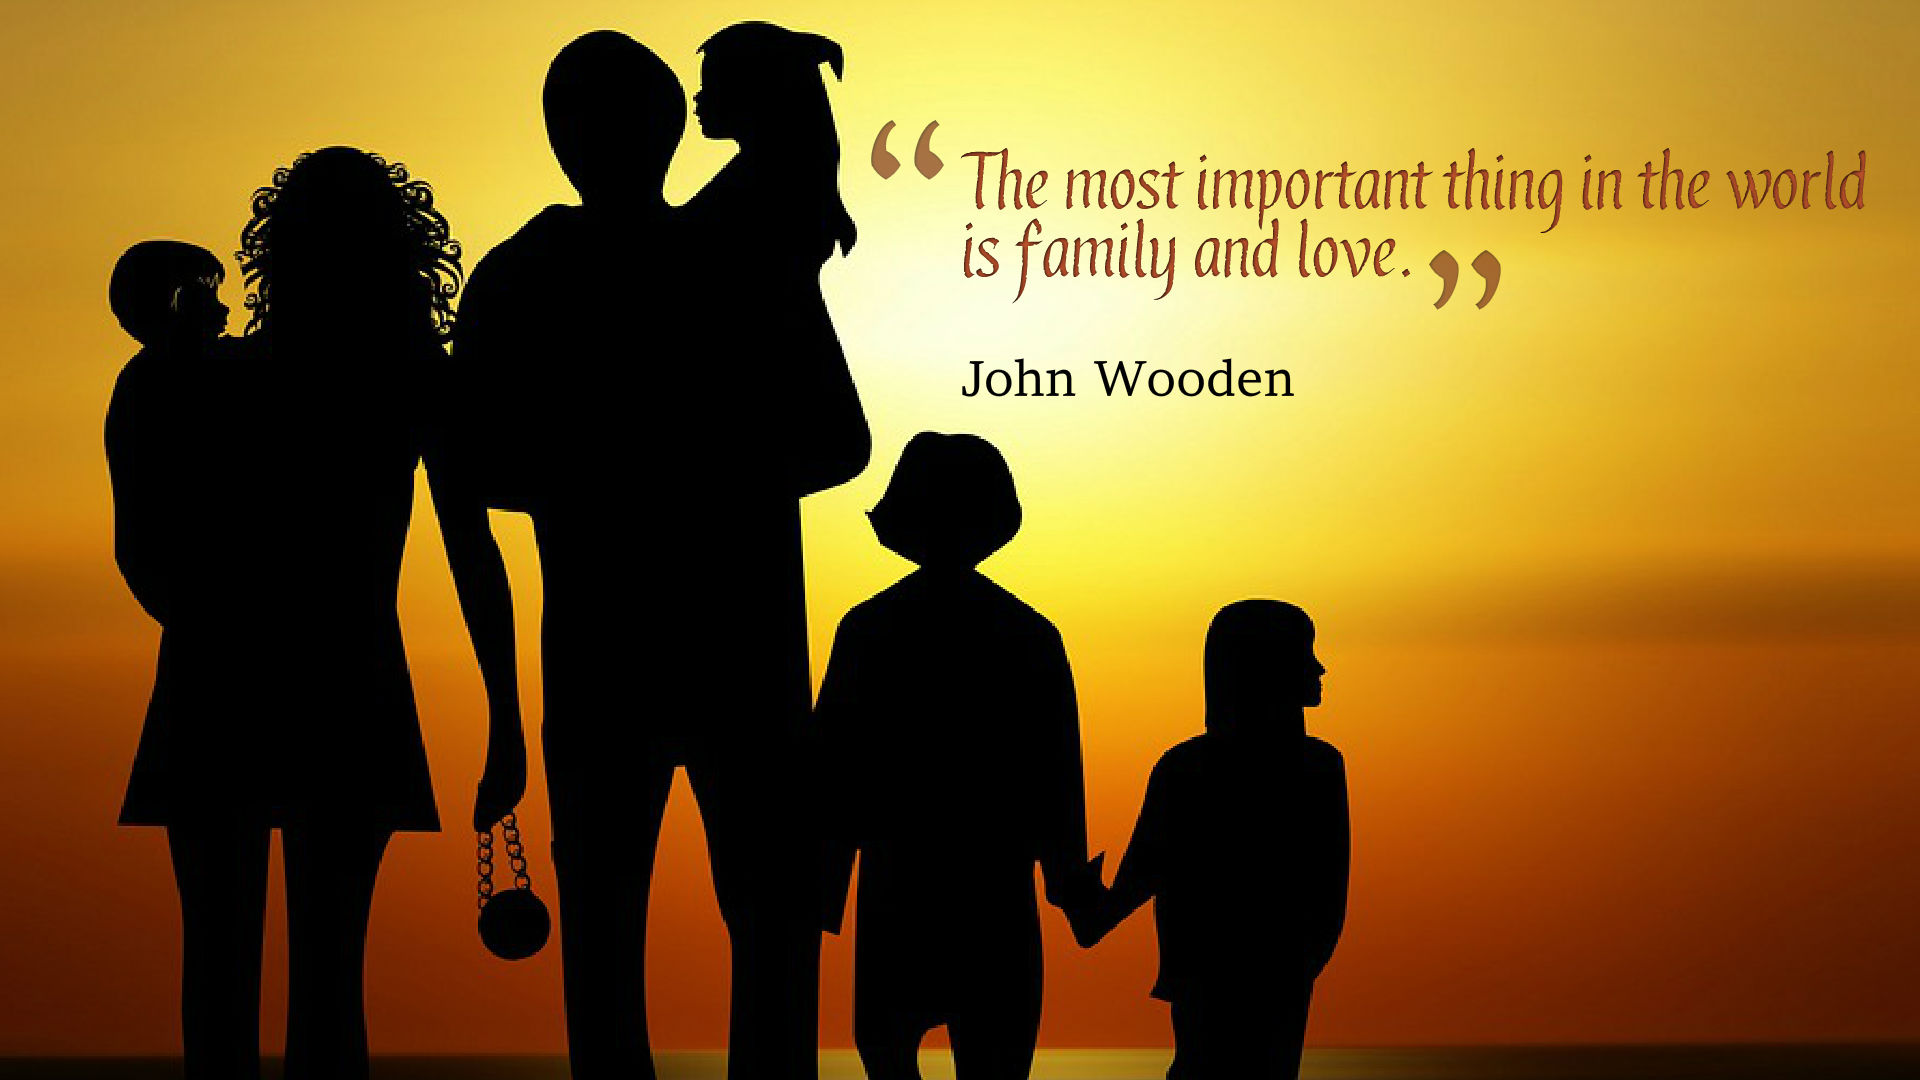 Family Quotes Hd Wallpapers - Family Is The Most Beautiful Thing - HD Wallpaper 